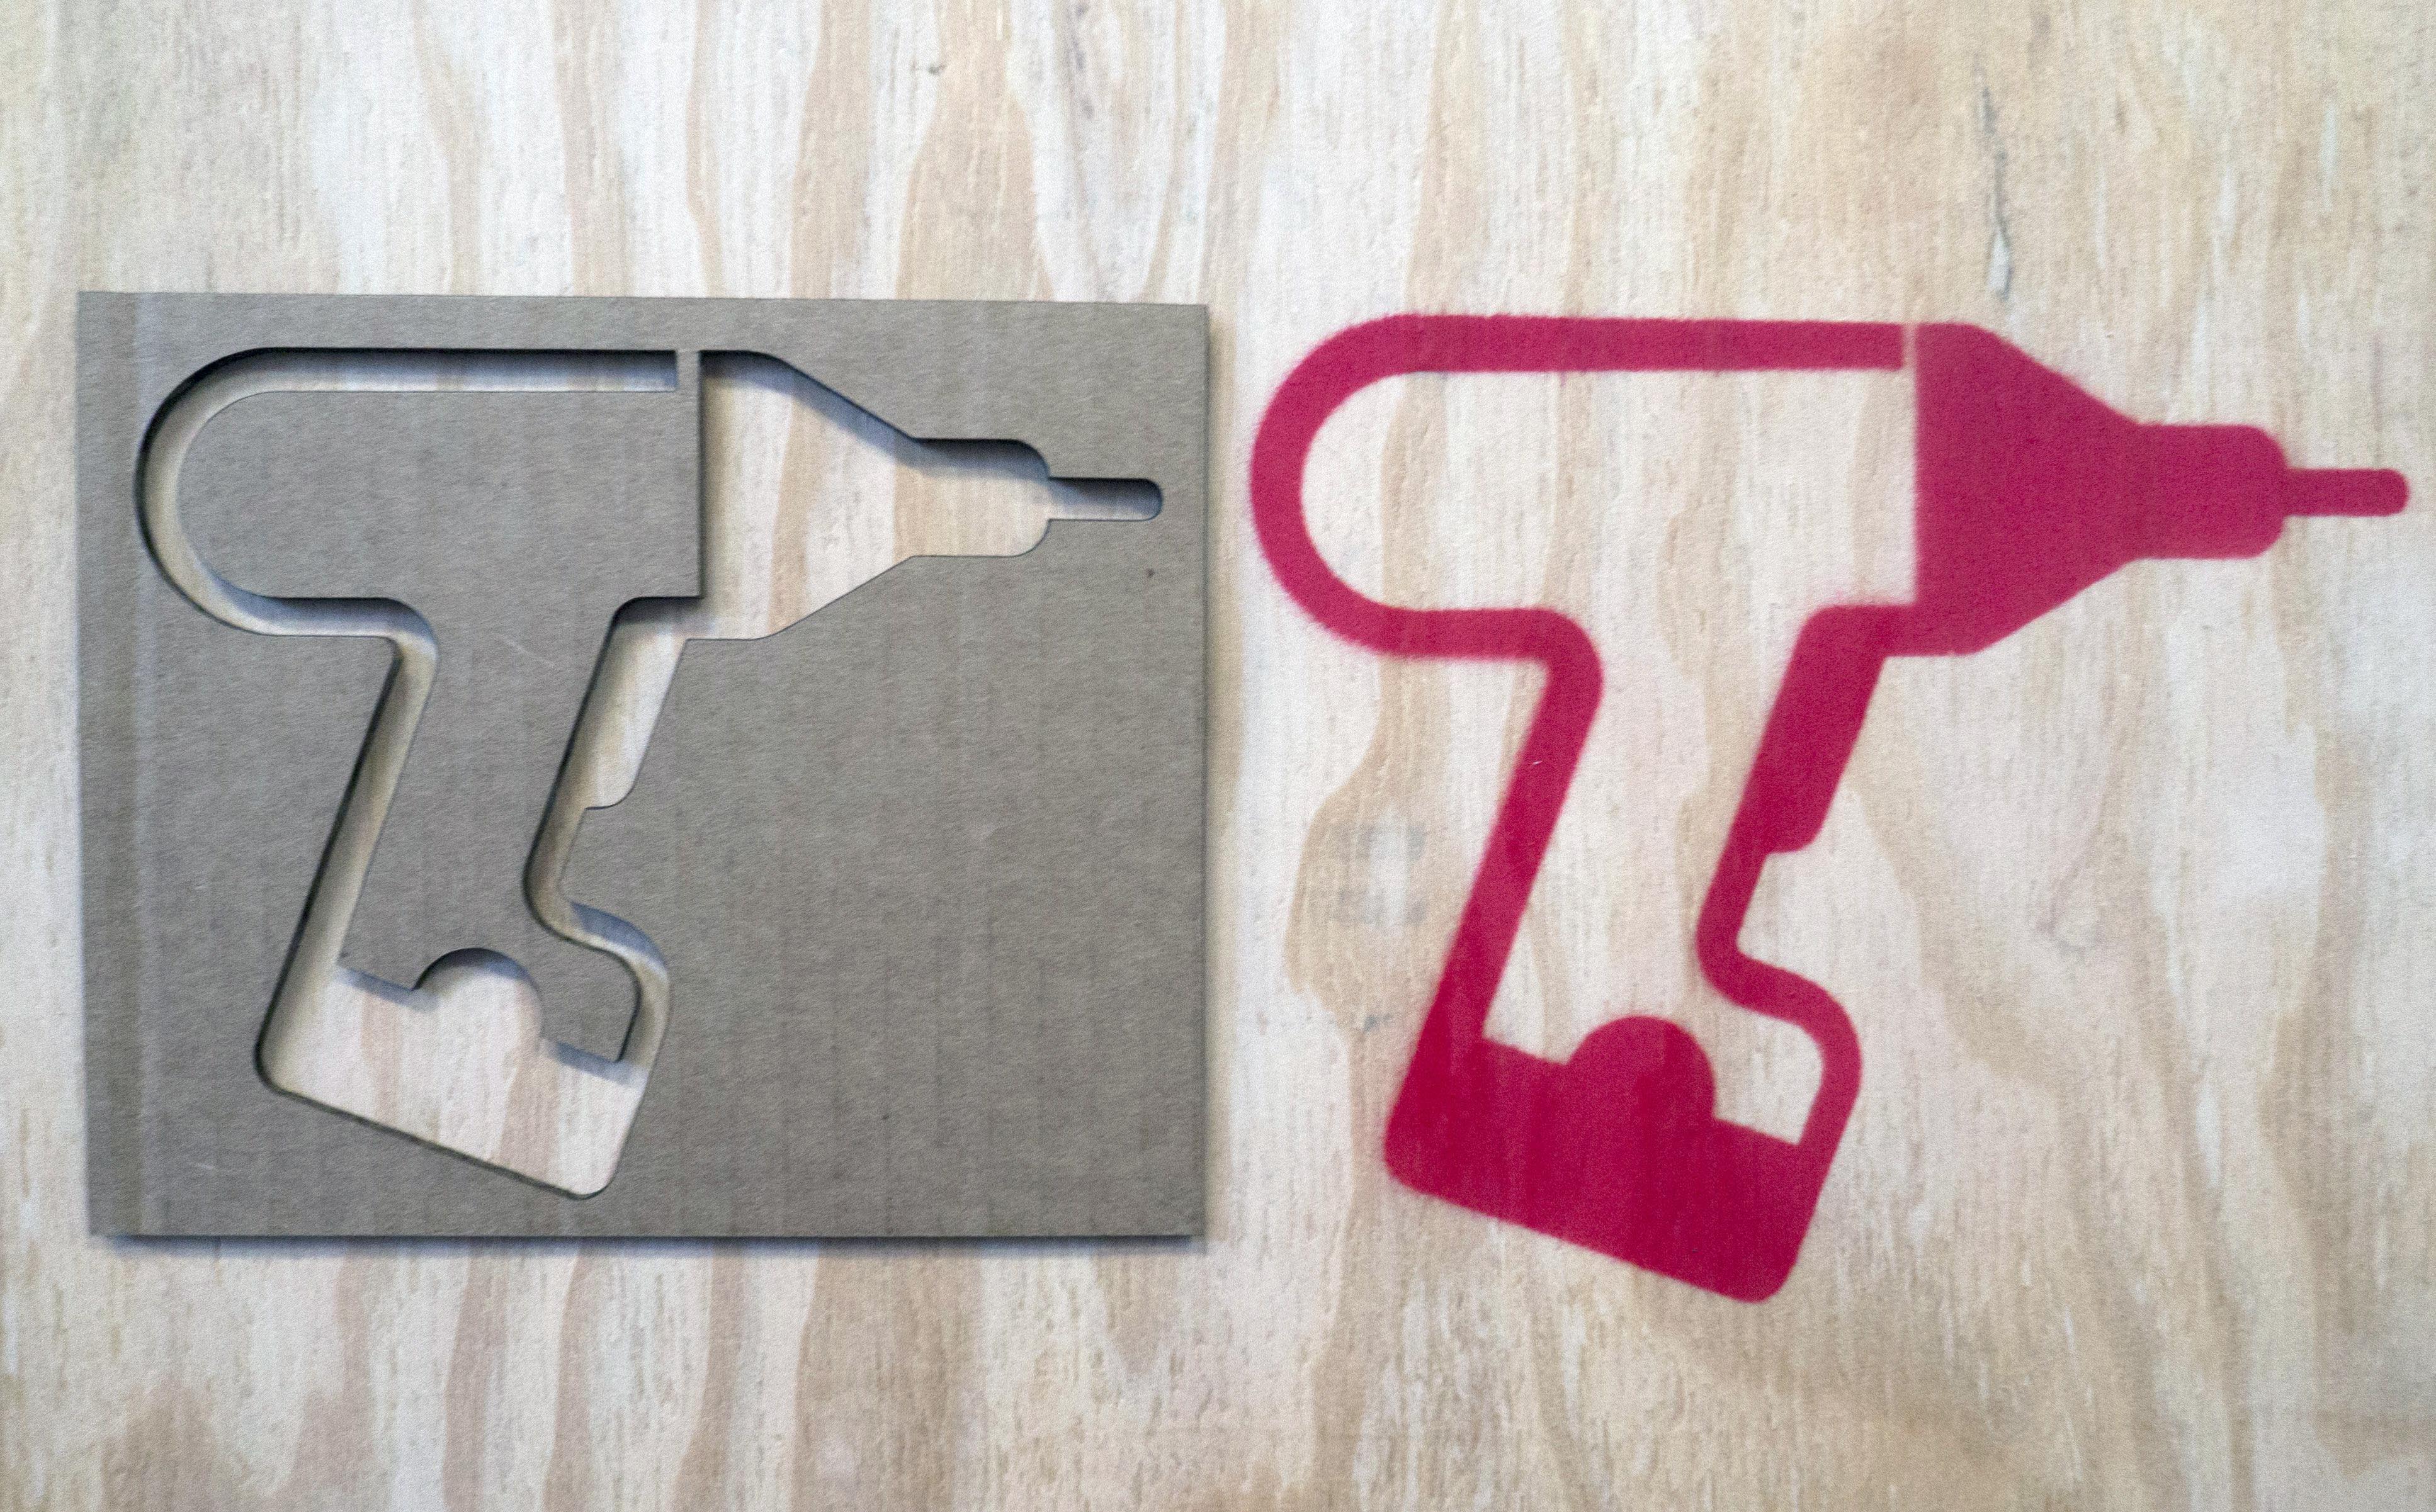 Laser Cutters 101: How to Make a Stencil from Vector Art